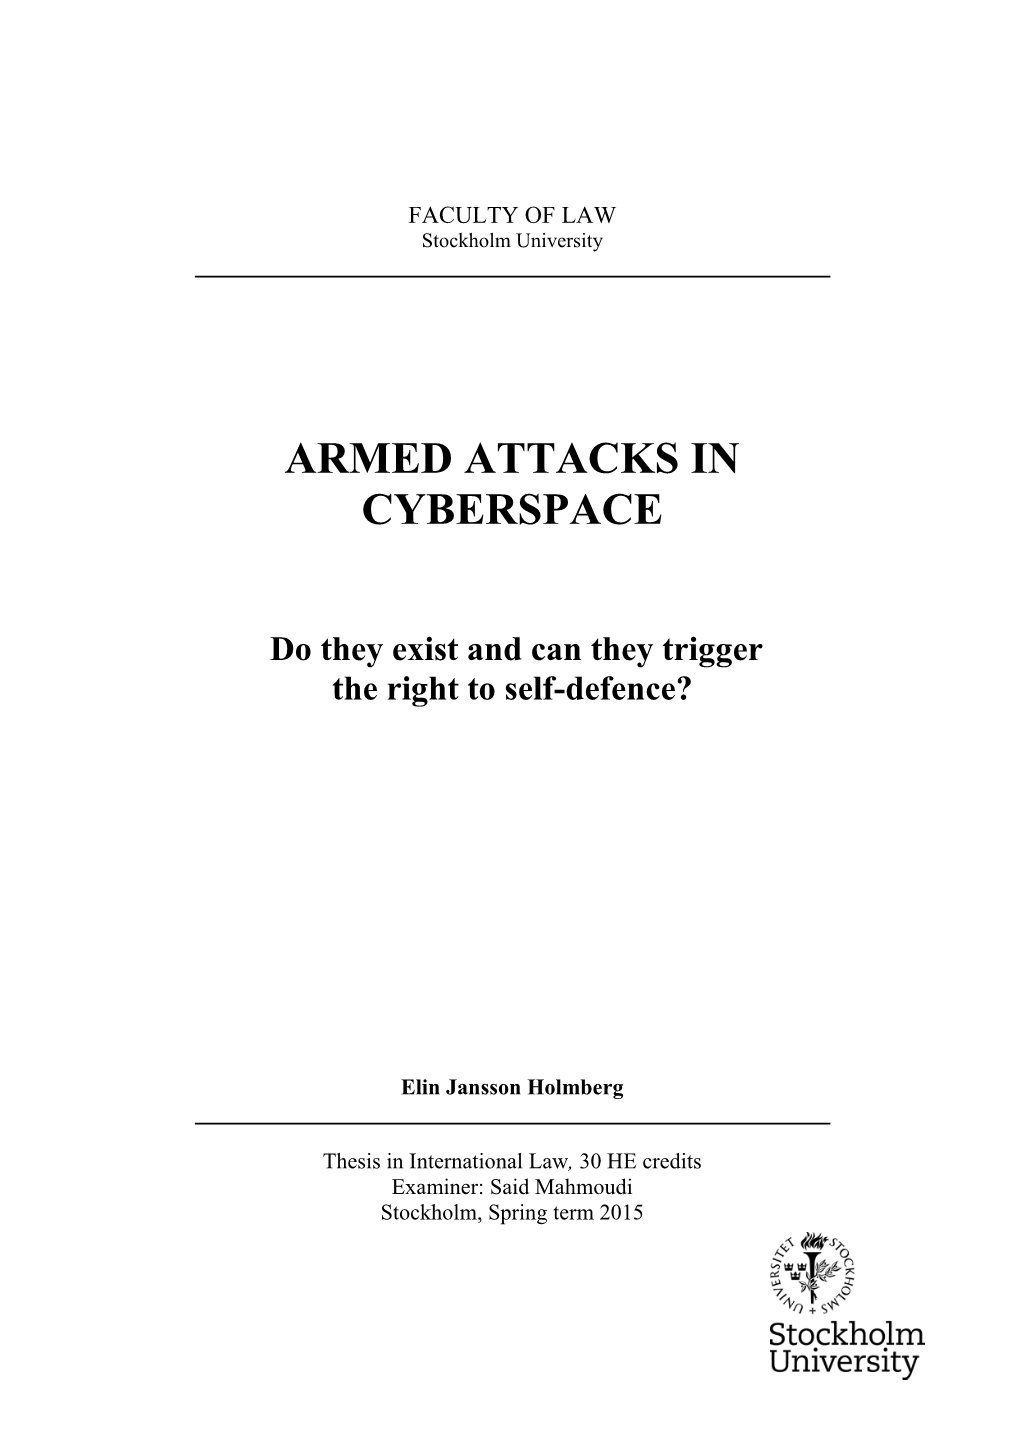 Armed Attacks in Cyberspace